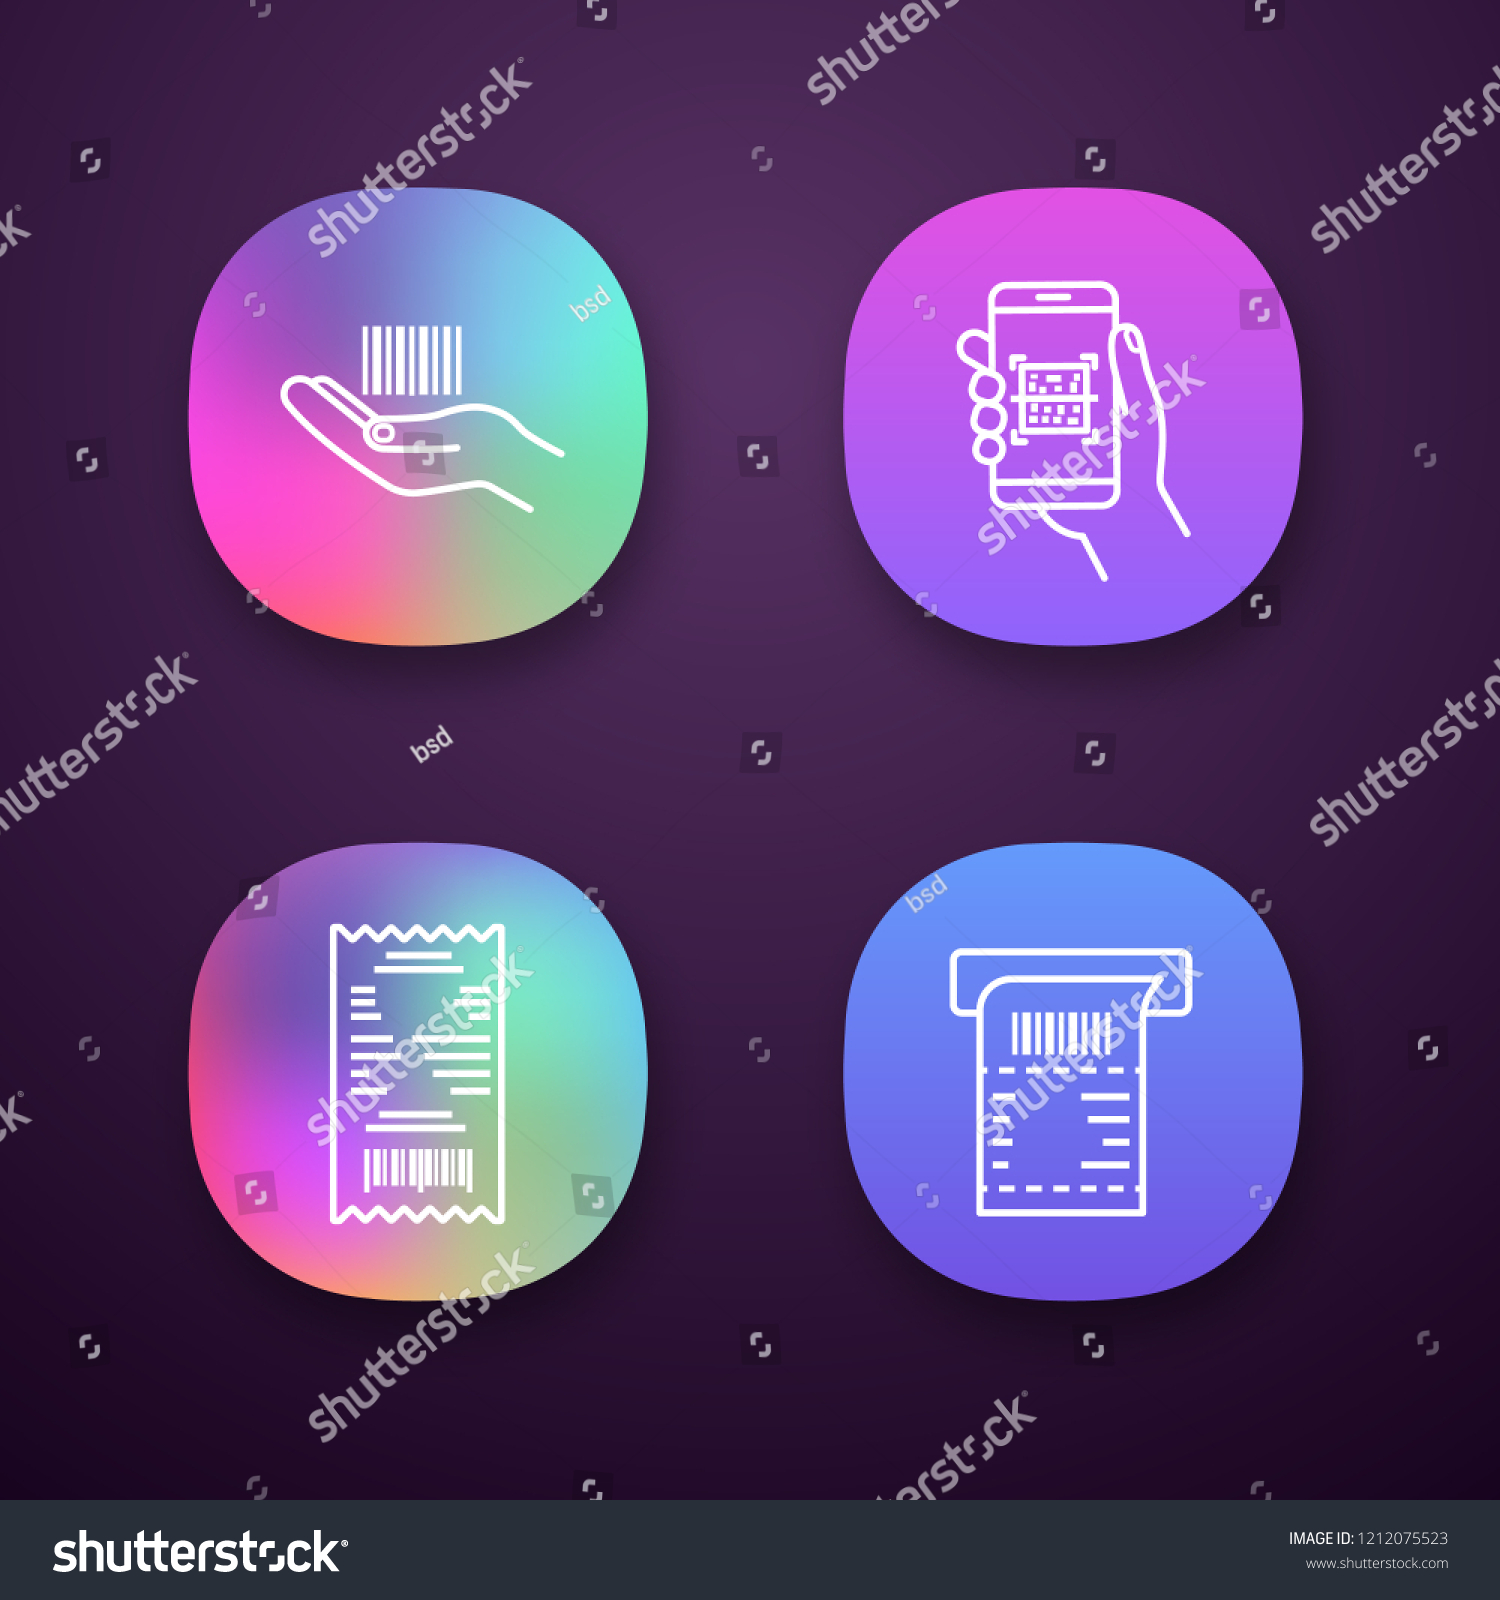 Barcodes app icons set. UI/UX user interface. Linear barcode in hand, QR codes scanning app, cash receipt, ATM paper check. Web or mobile applications. Vector isolated illustrations #1212075523